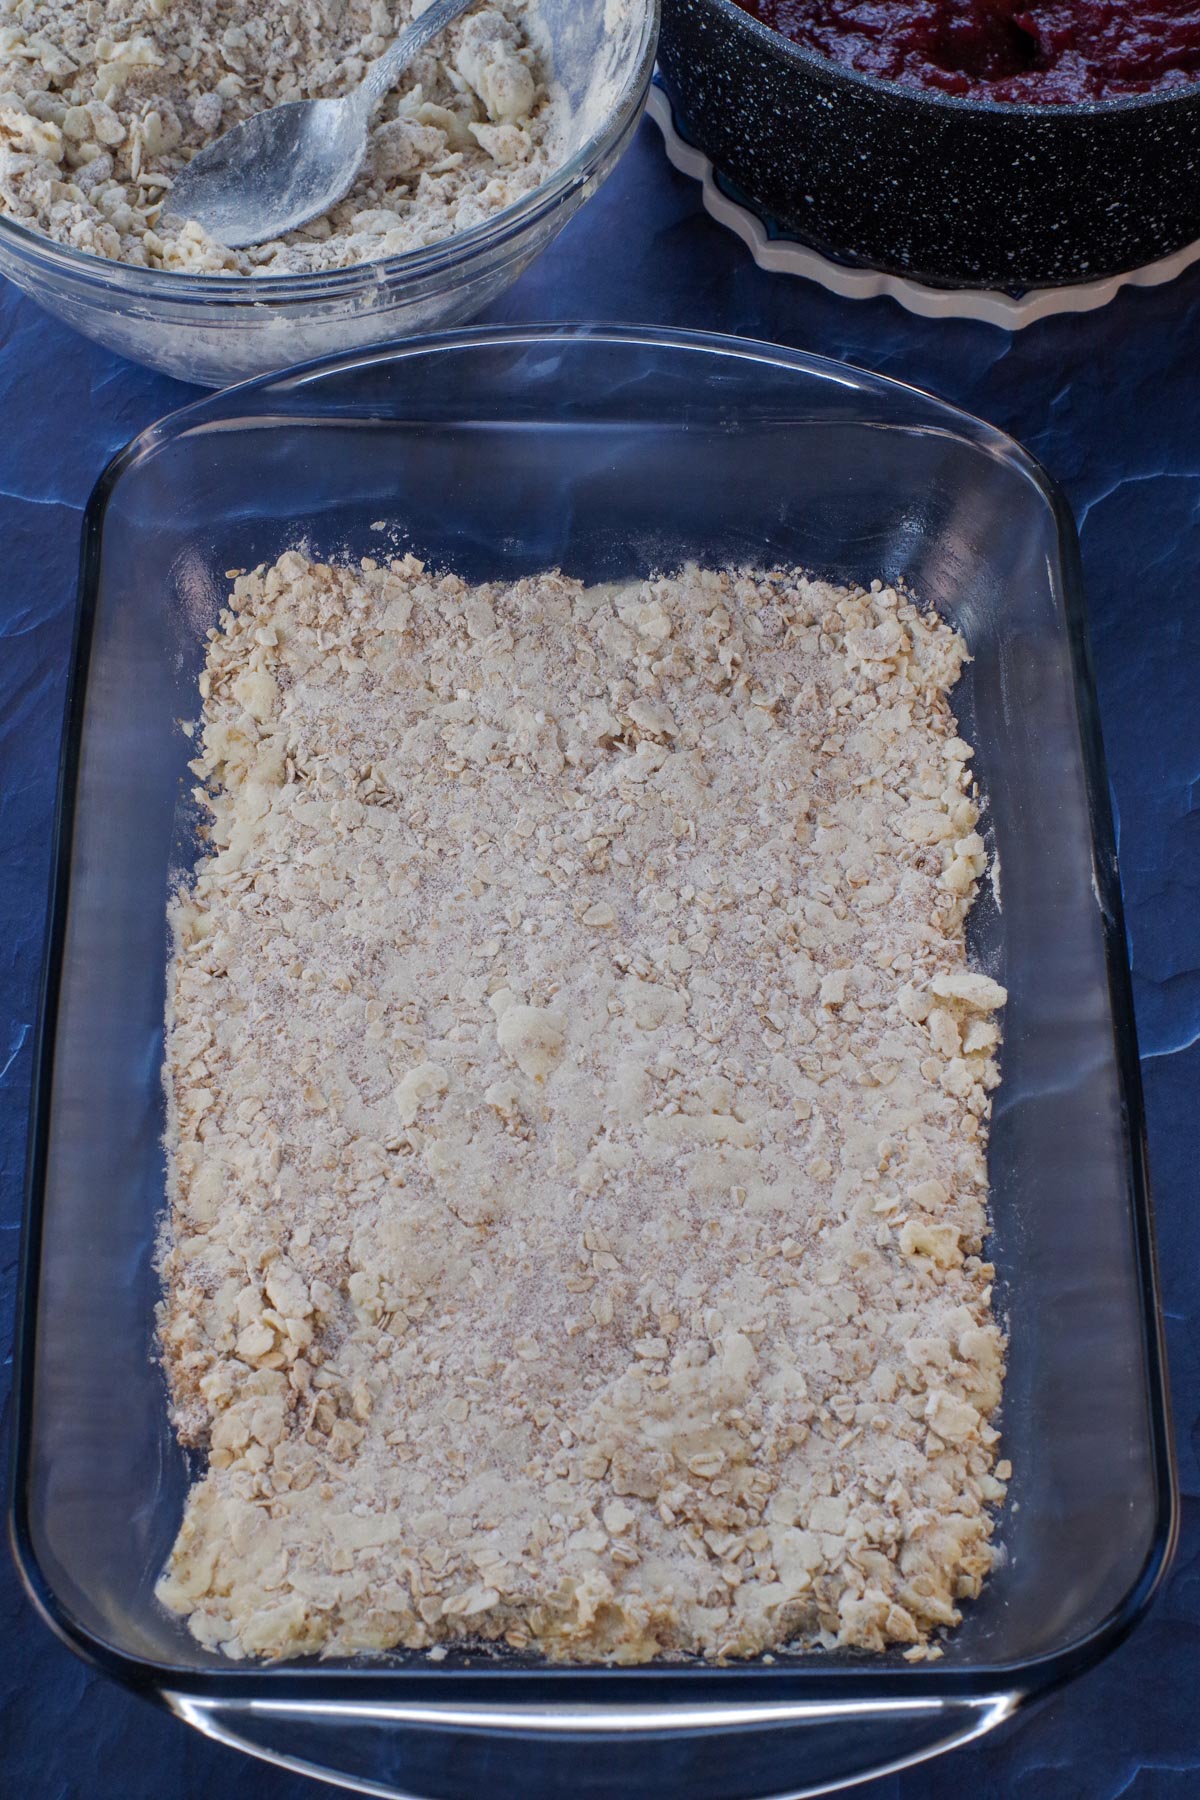 oat mixture (base) pressed into bottom of baking pan